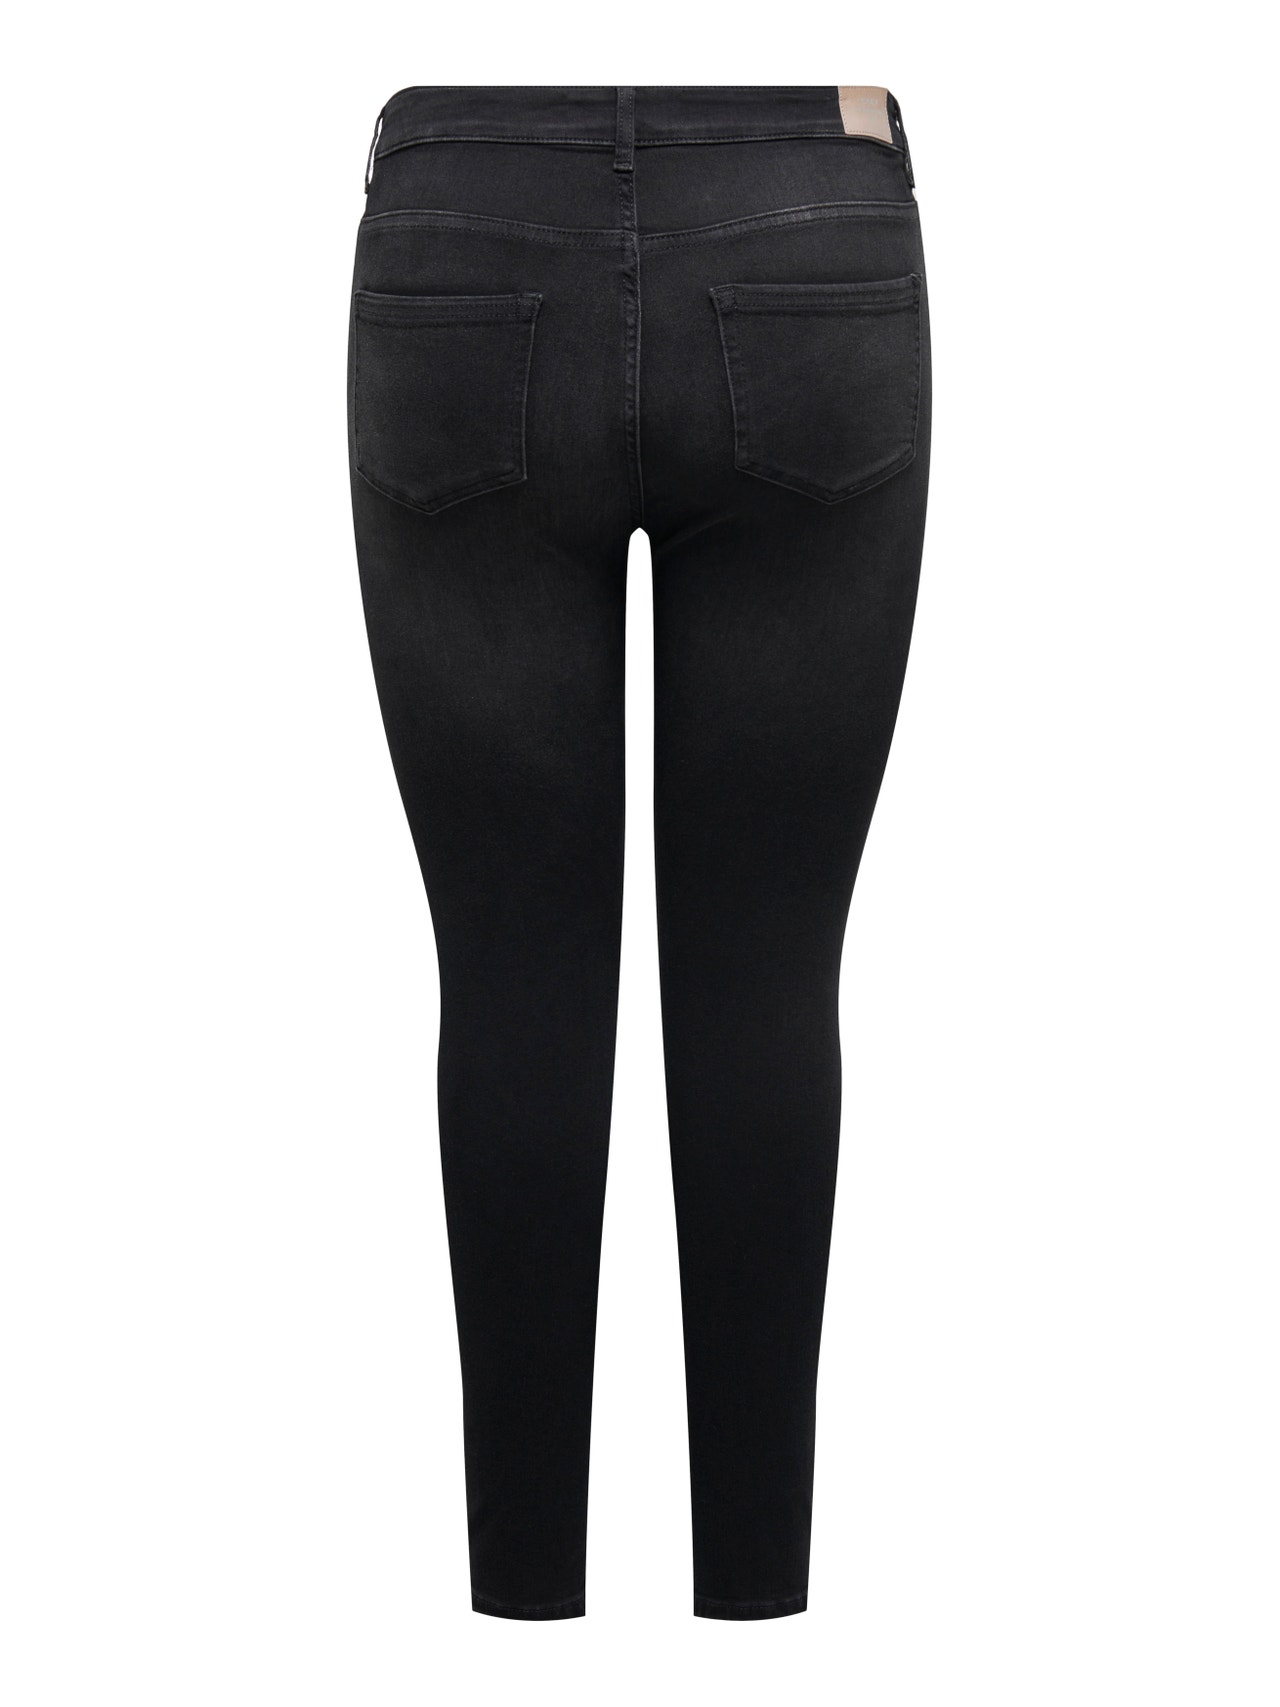 ONLY Jeans Skinny Fit Taille classique -Black Denim - 15280651